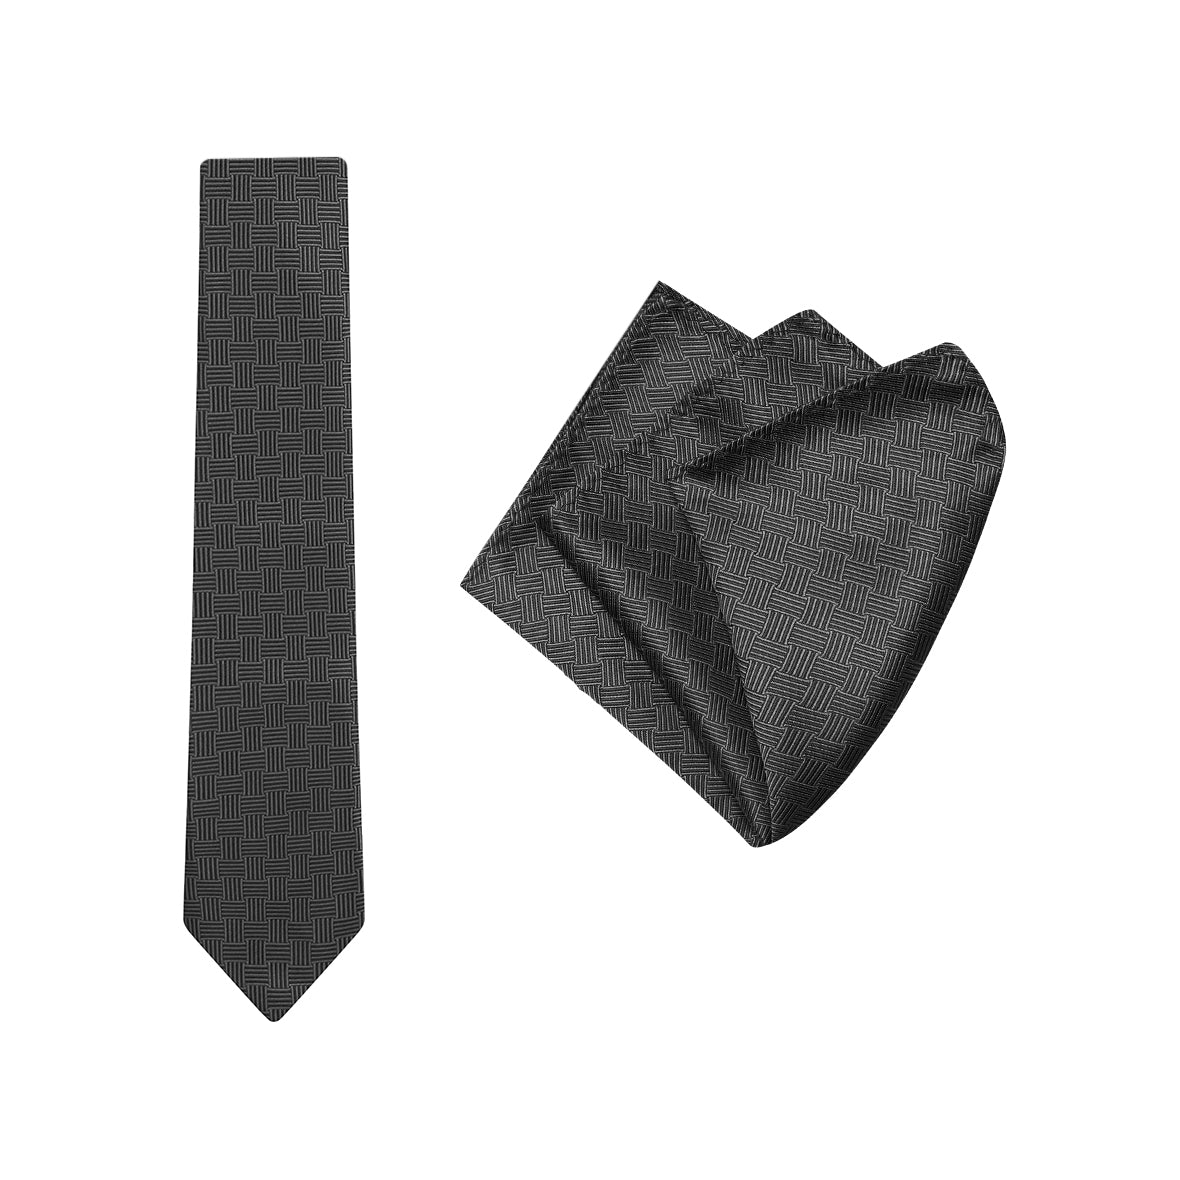 TIE + POCKET SQUARE SET. Basket. Black. Supplied with matching pocket square.-Ties-PEROZ Accessories